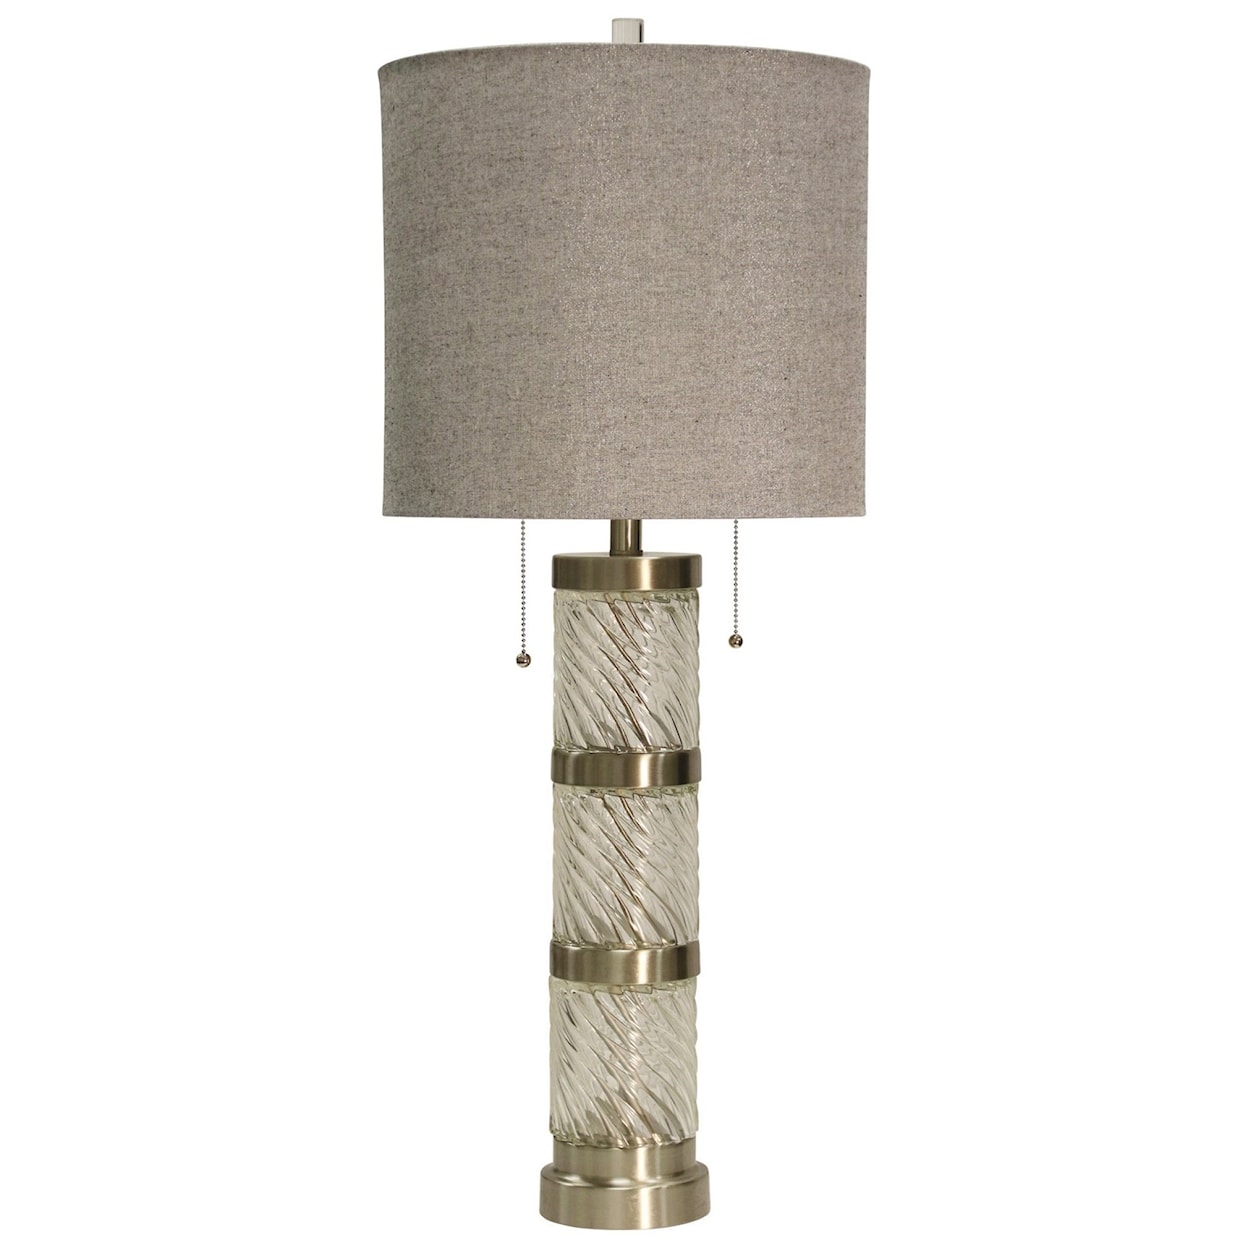 StyleCraft Lamps Brushed Steel Lamp